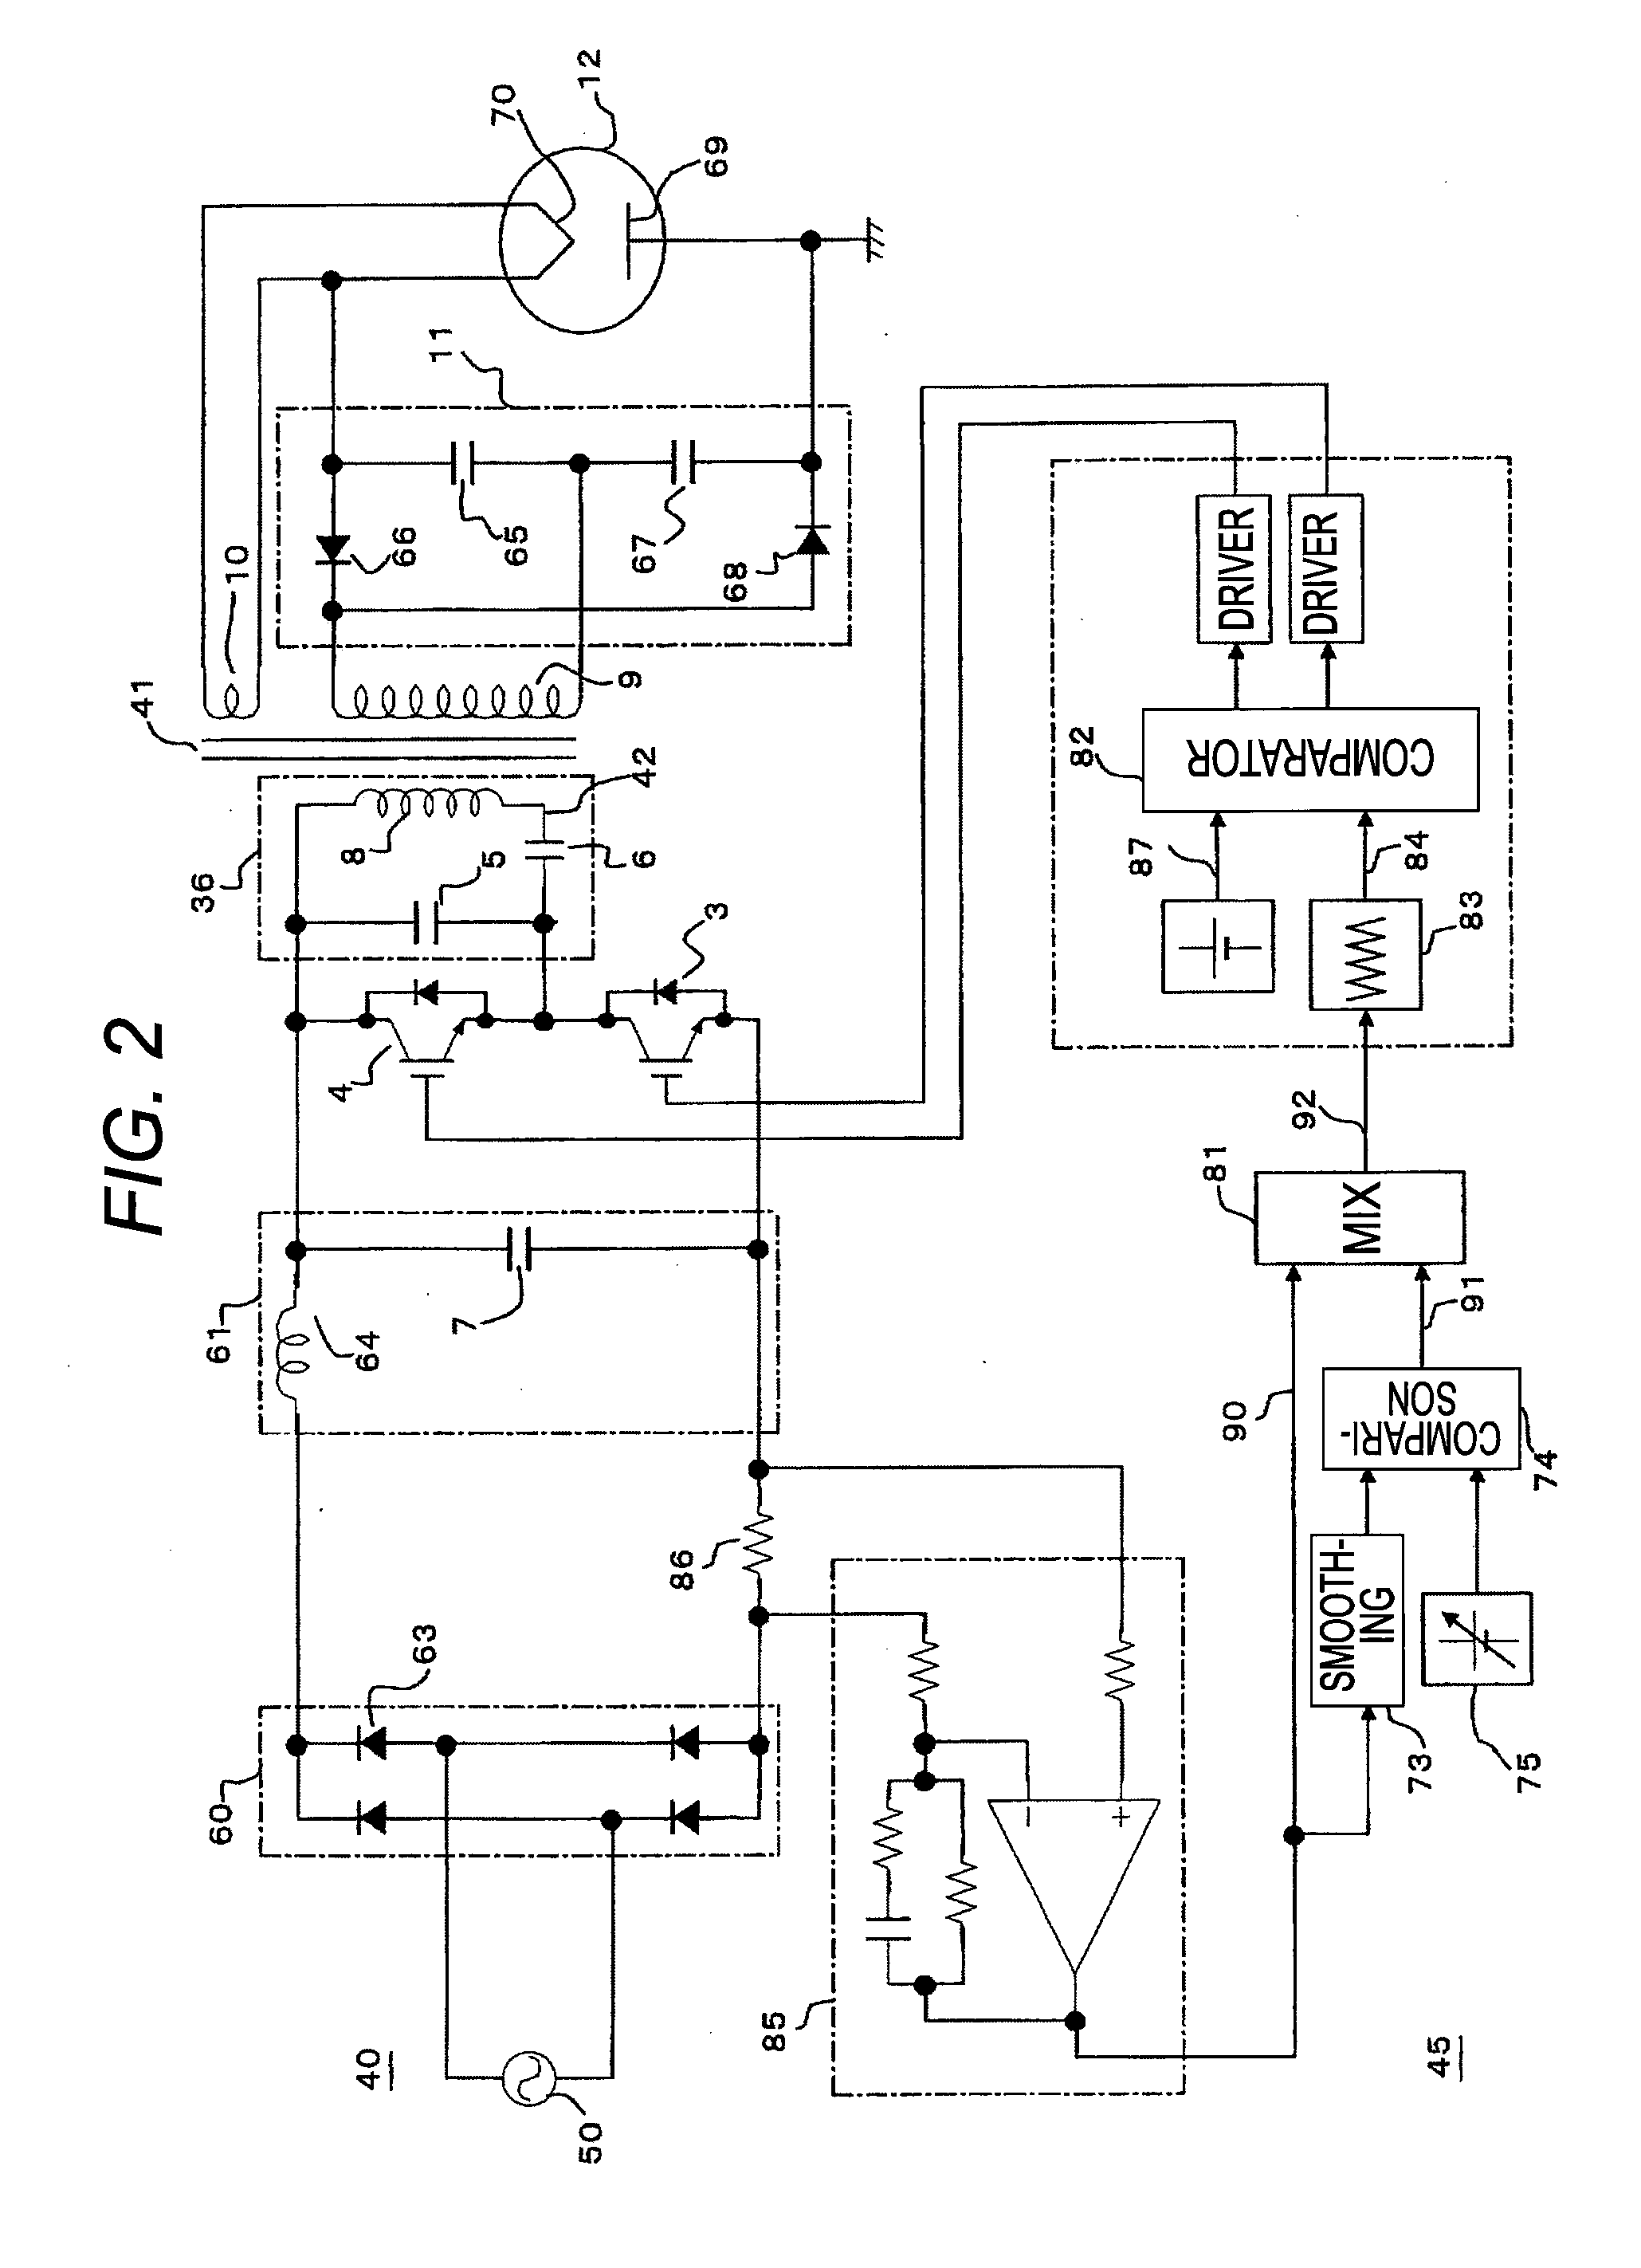 Power control unit for high-frequency dielectric heating and control method thereof